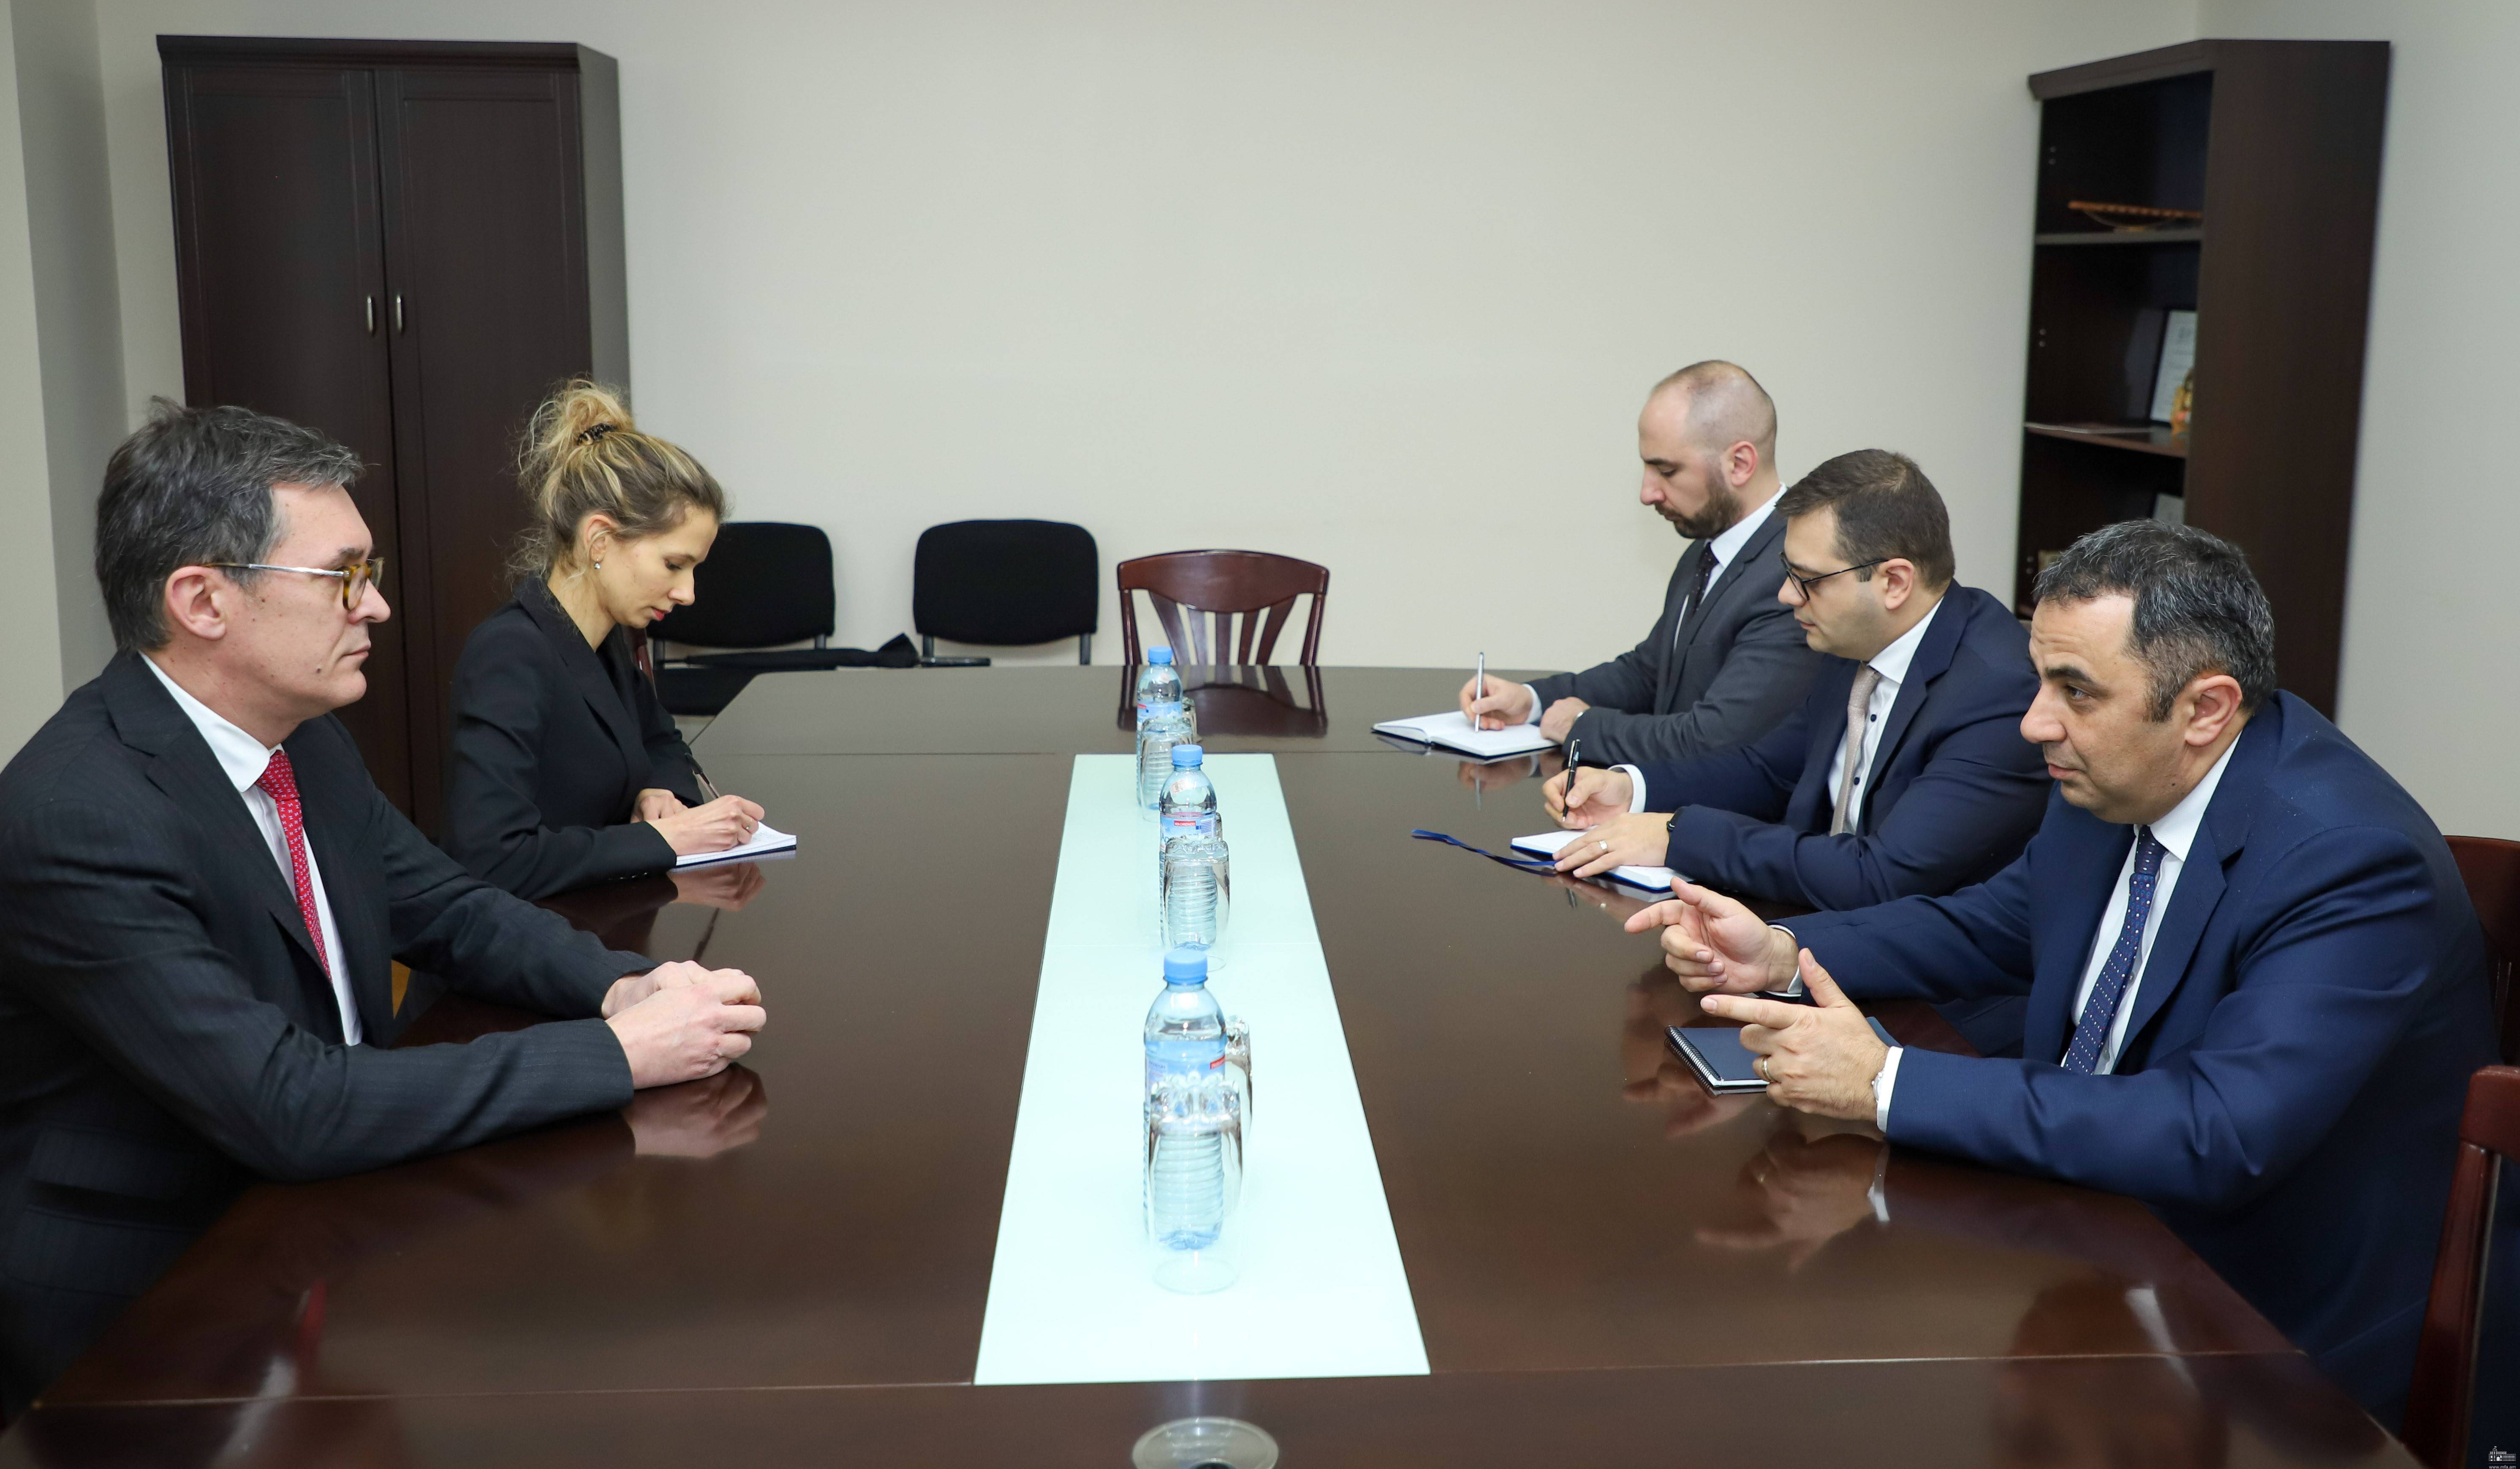 Deputy Minister of Foreign Affairs presented details of subversive attack of Azerbaijan in Nagorno-Karabakh to French Co-Chair of OSCE Minsk Group